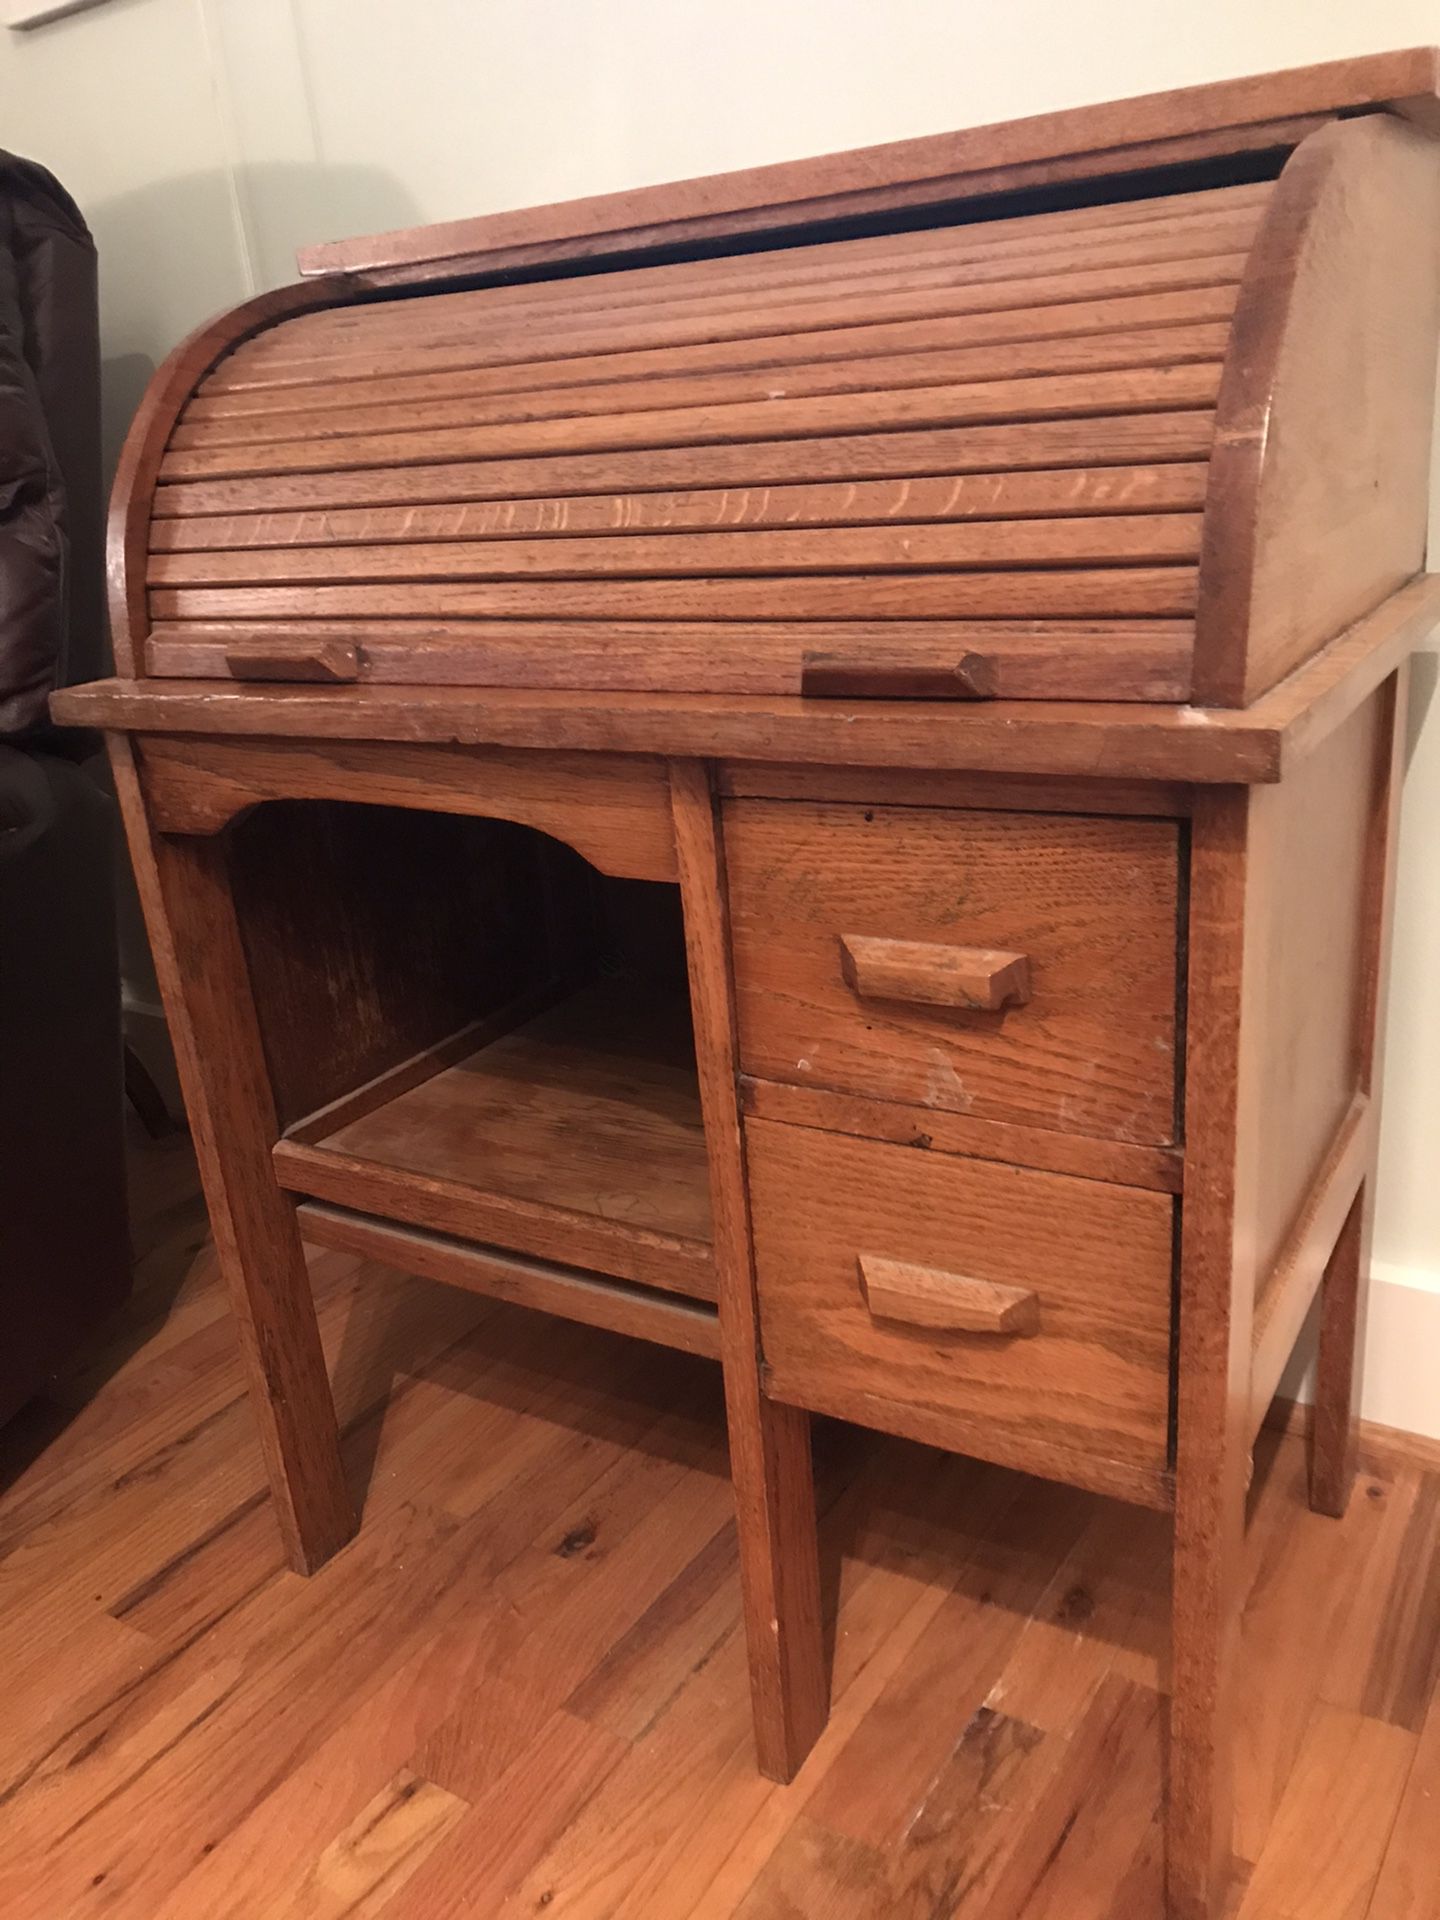 Roll-top oak desk, child-size (27” wide, 17 1/2 in deep, 35 in high). Excellent condition. Pick up in Magnolia Springs. $50